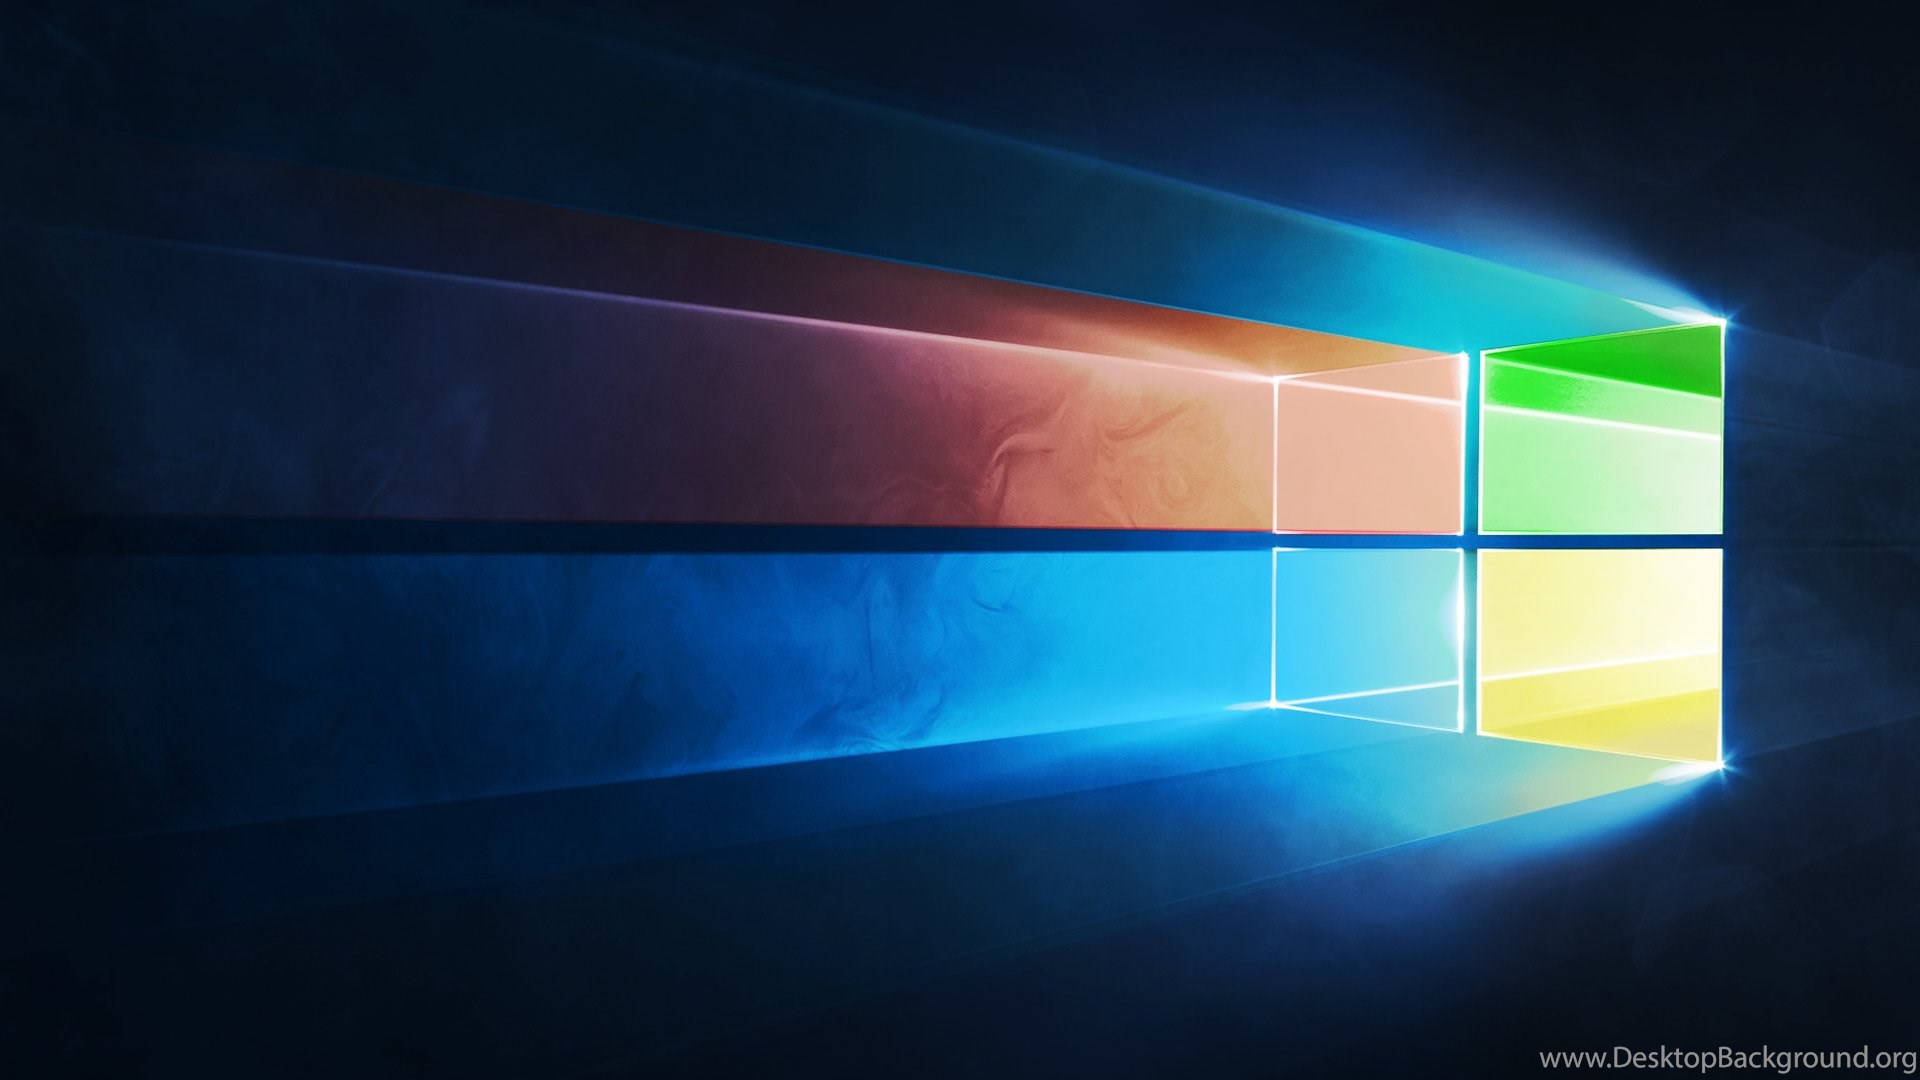 Windows 10 Wallpapers - Free Full Hd Wallpapers For 1080p ...